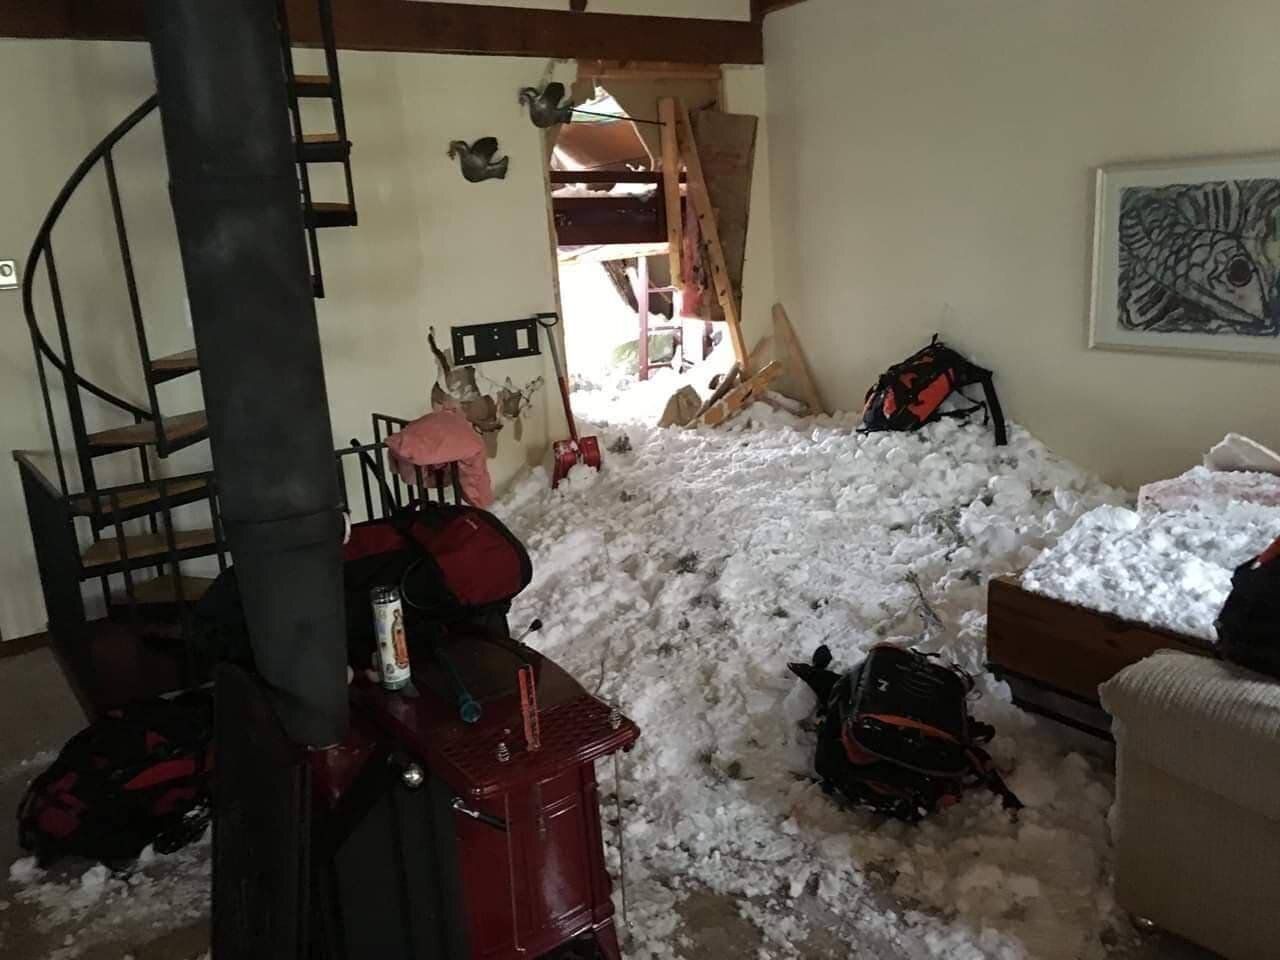 The living room of Hunt's house after the avalanche.